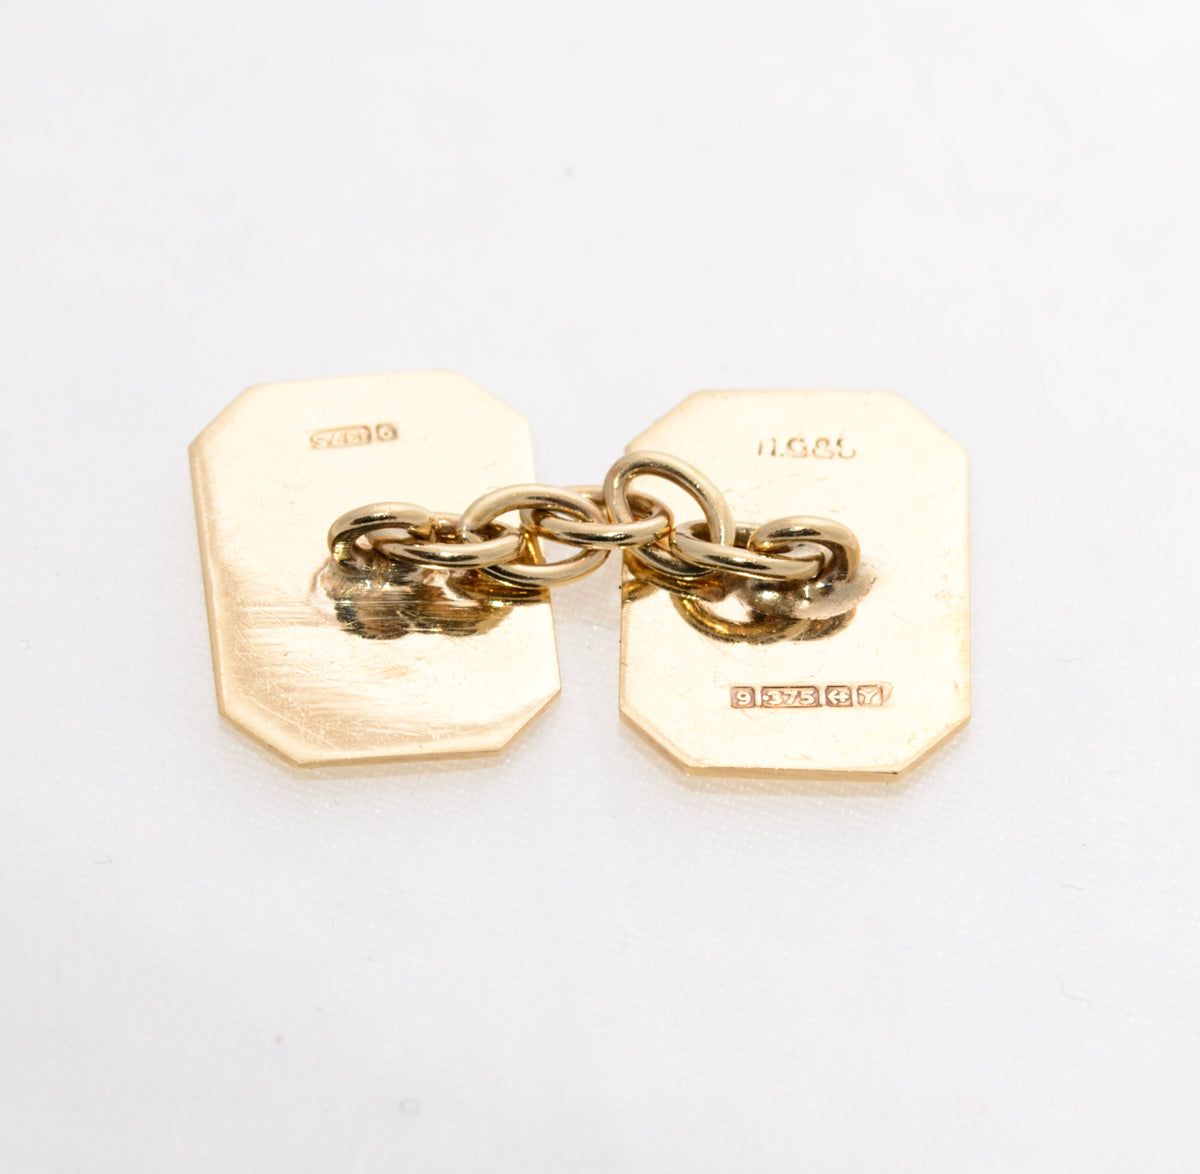 Pair Vintage 9ct Gold Mens Cufflinks Chain Type 1970's Retro Jewellery - Boxed (A1448)